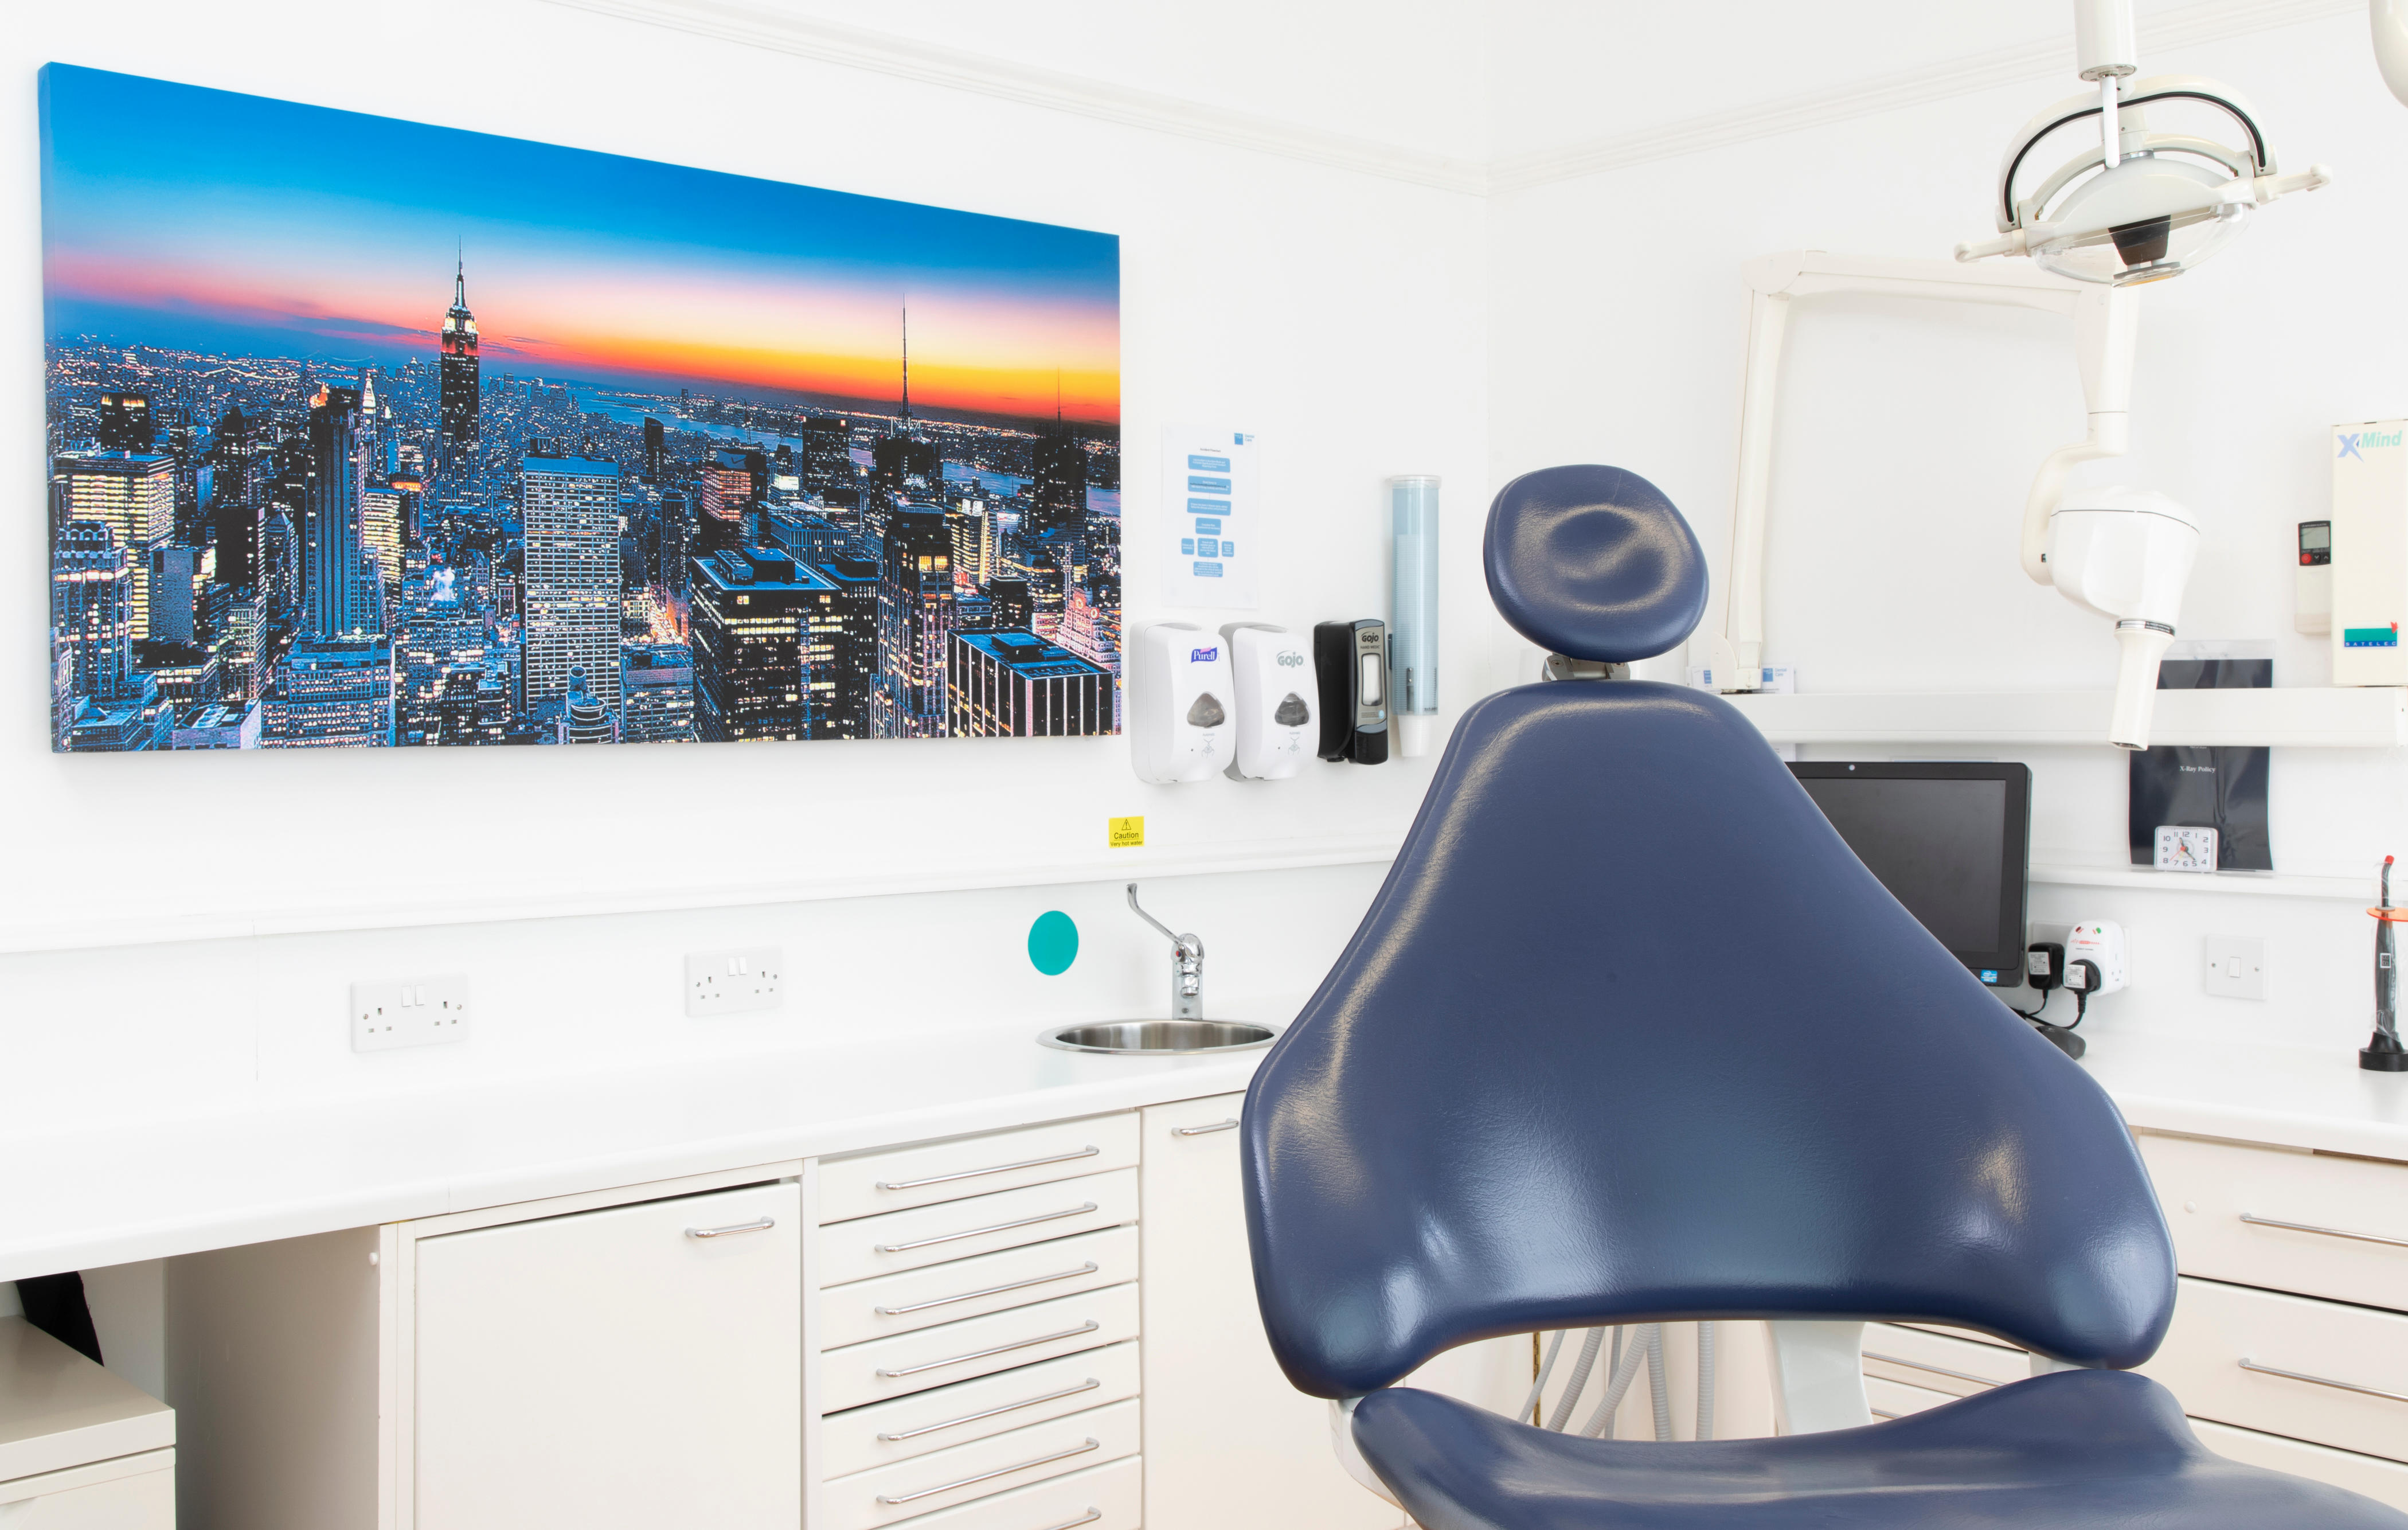 Images Shiphay Dental and Torbay Implant Centre